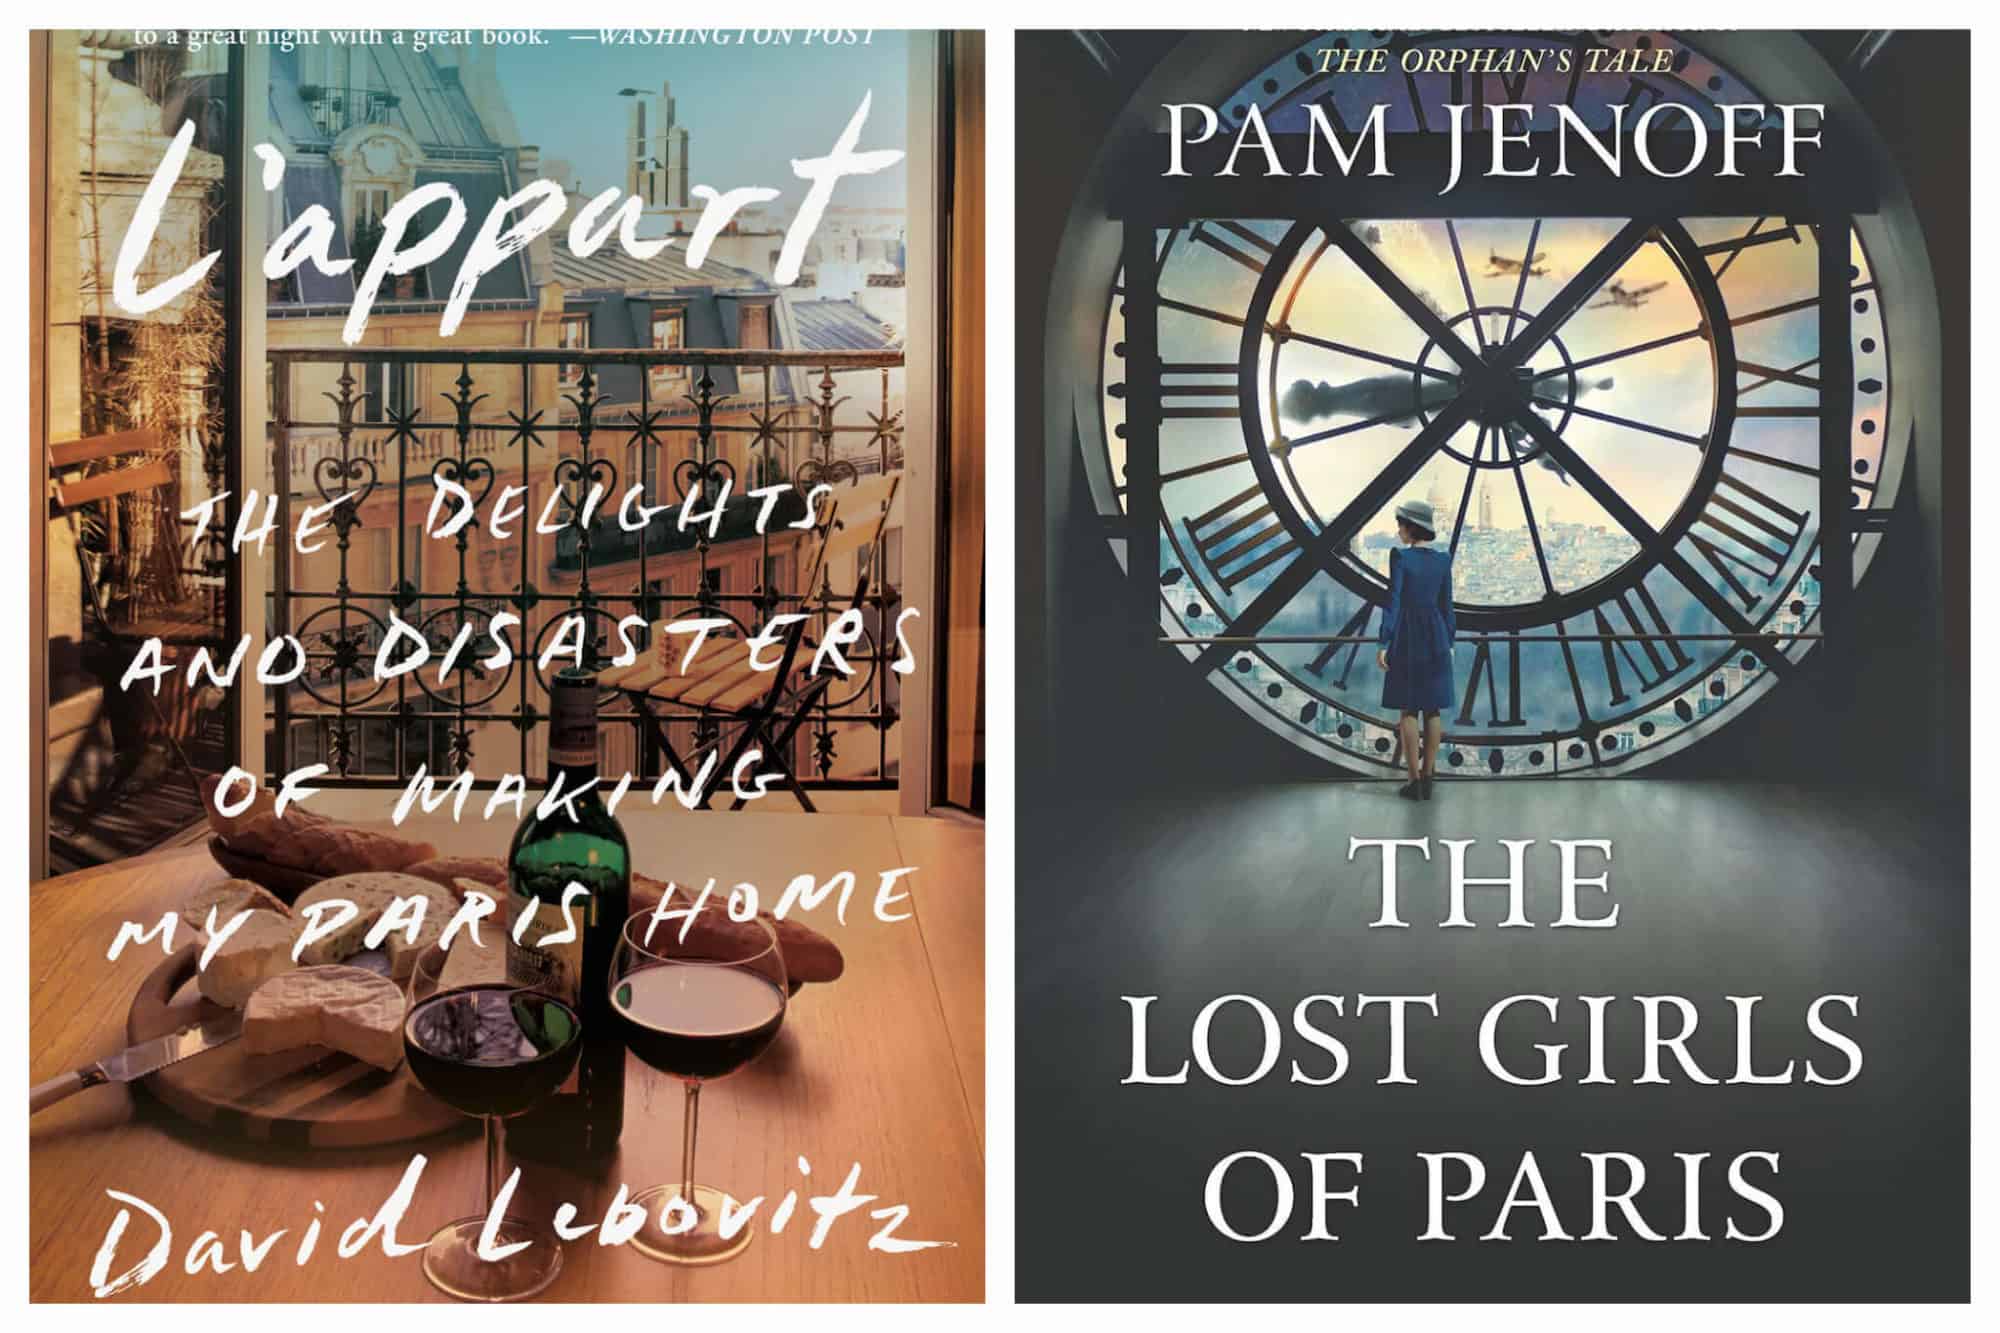 Left: The cover of David Lebovitz's new book, L'appart: The Delights and Disasters of Making Paris Home, Right: The cover of Pam Jenoff's book, The Lost Girls of Paris